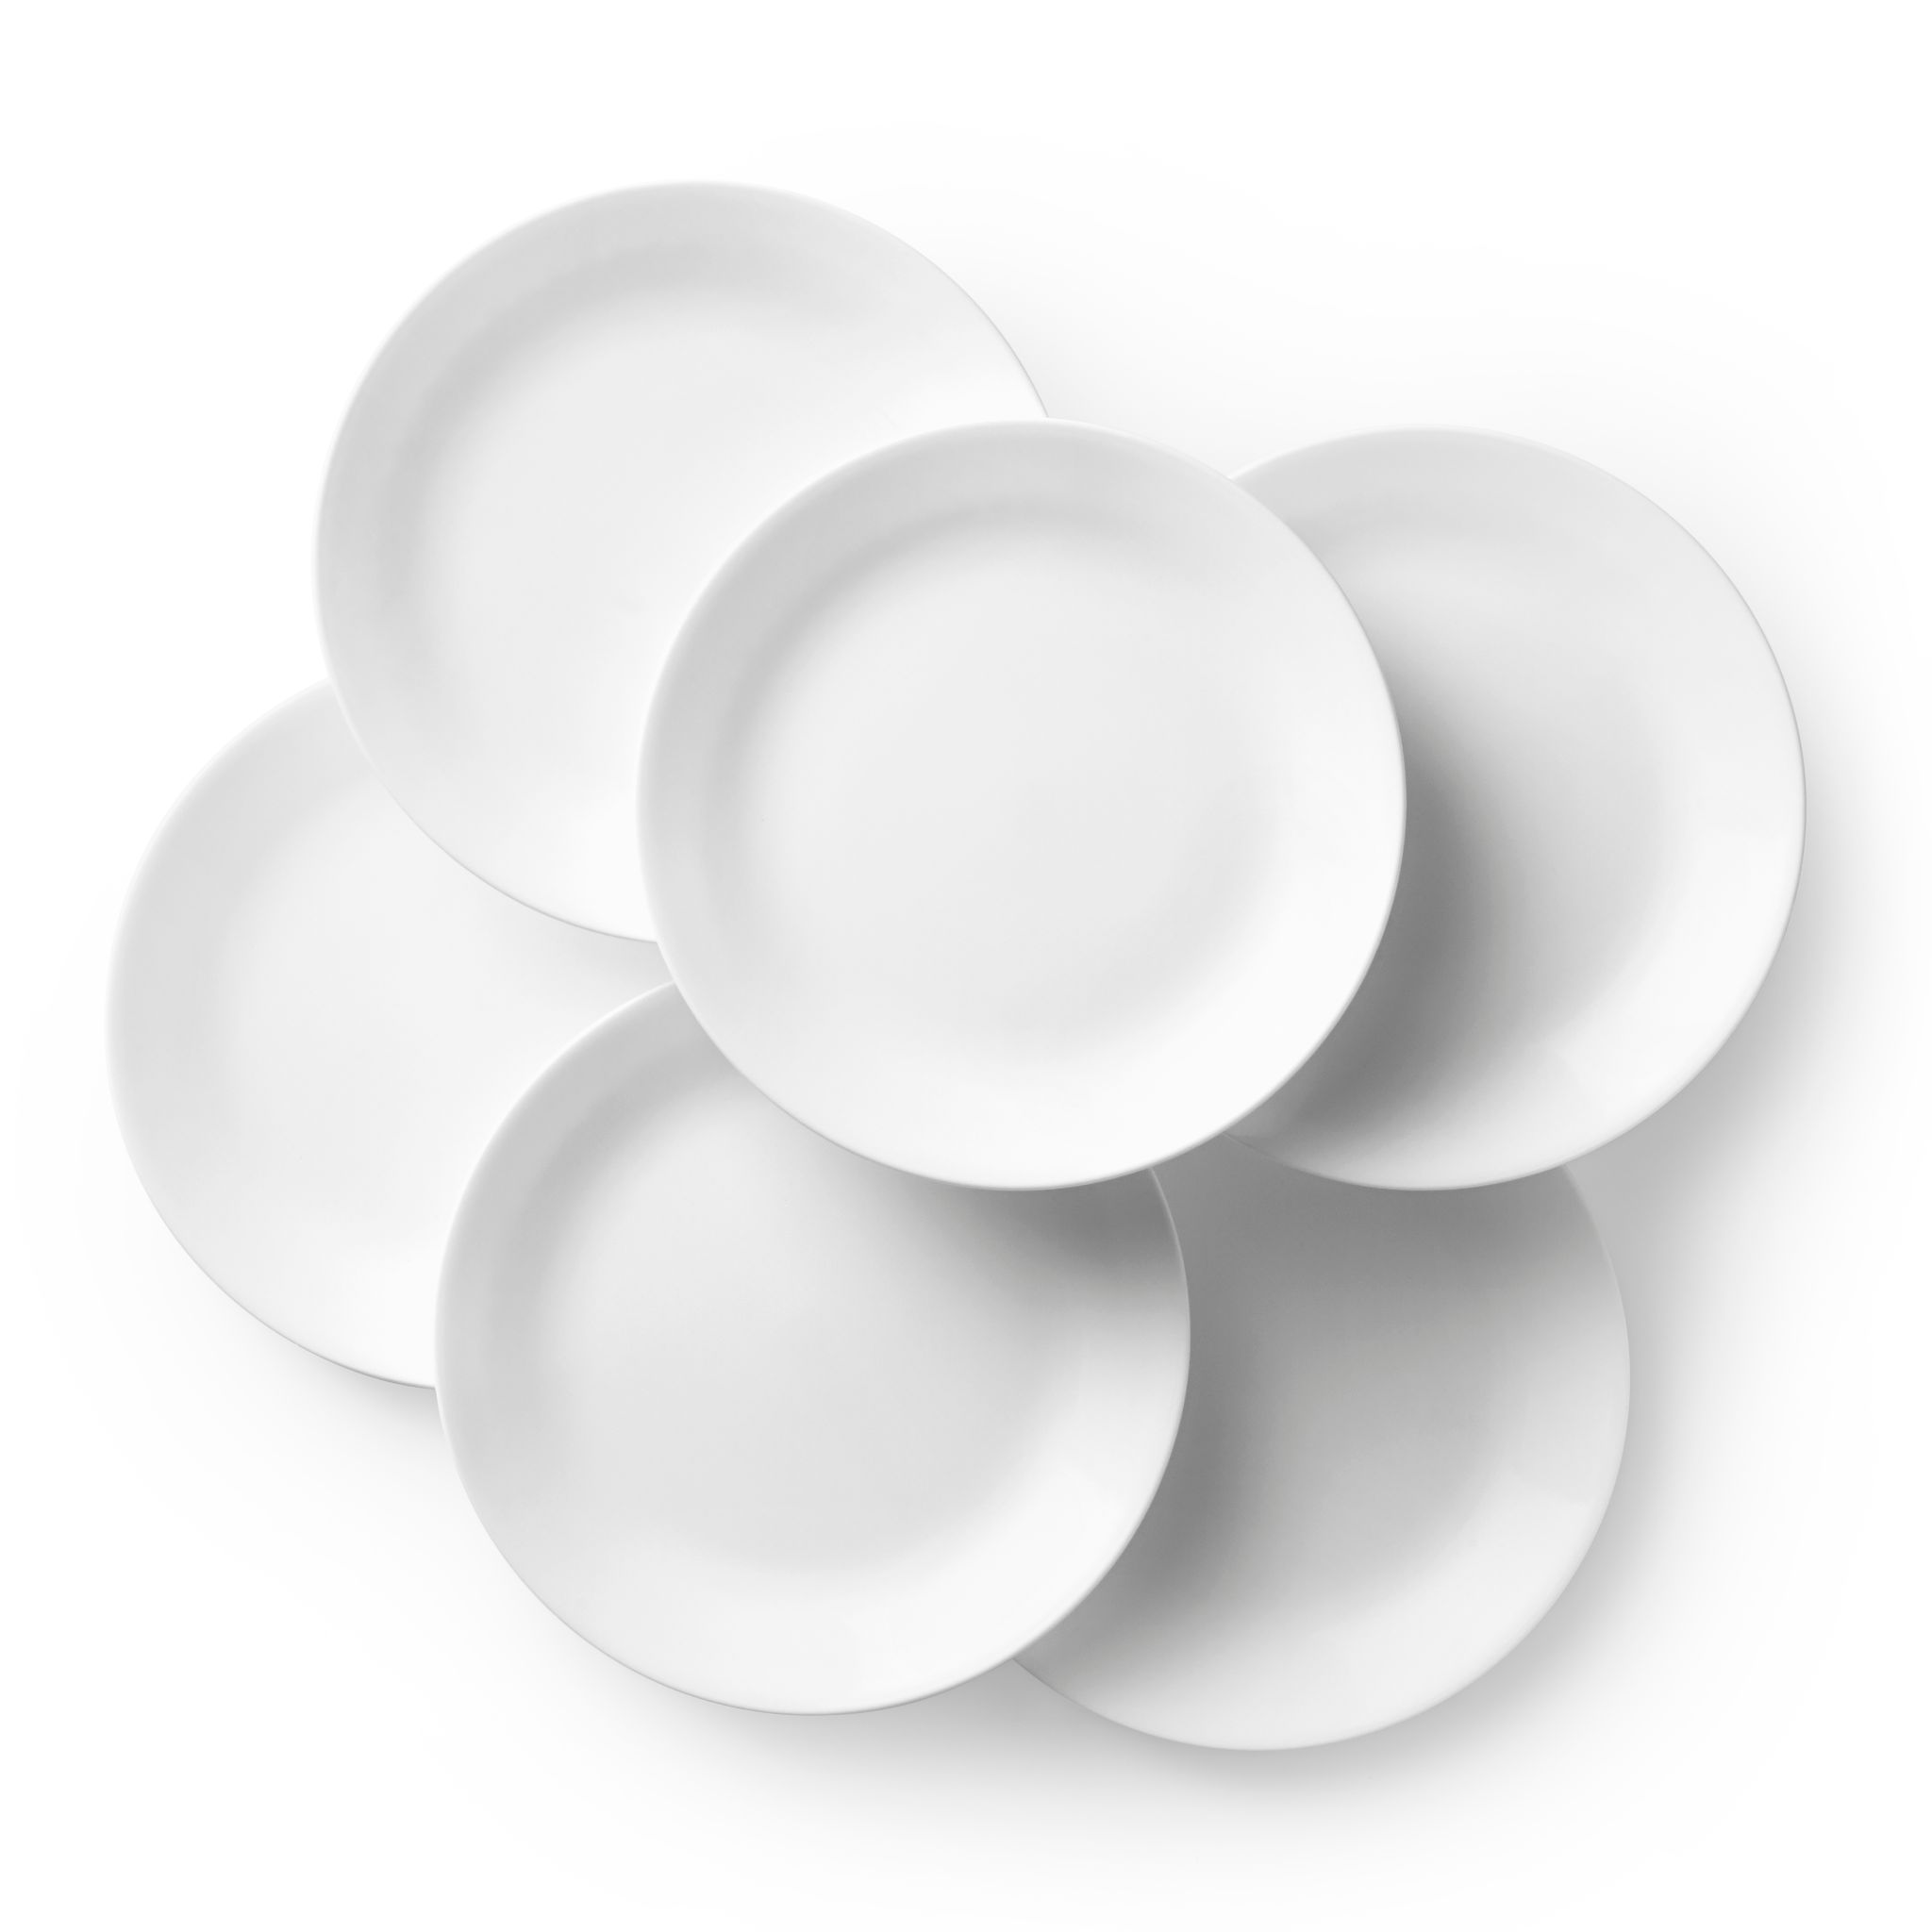 CORELLE WINTER FROST WHITE 8.5 INCH LUNCH/SALAD PLATES x 4 NEW FREE USA SHIP 